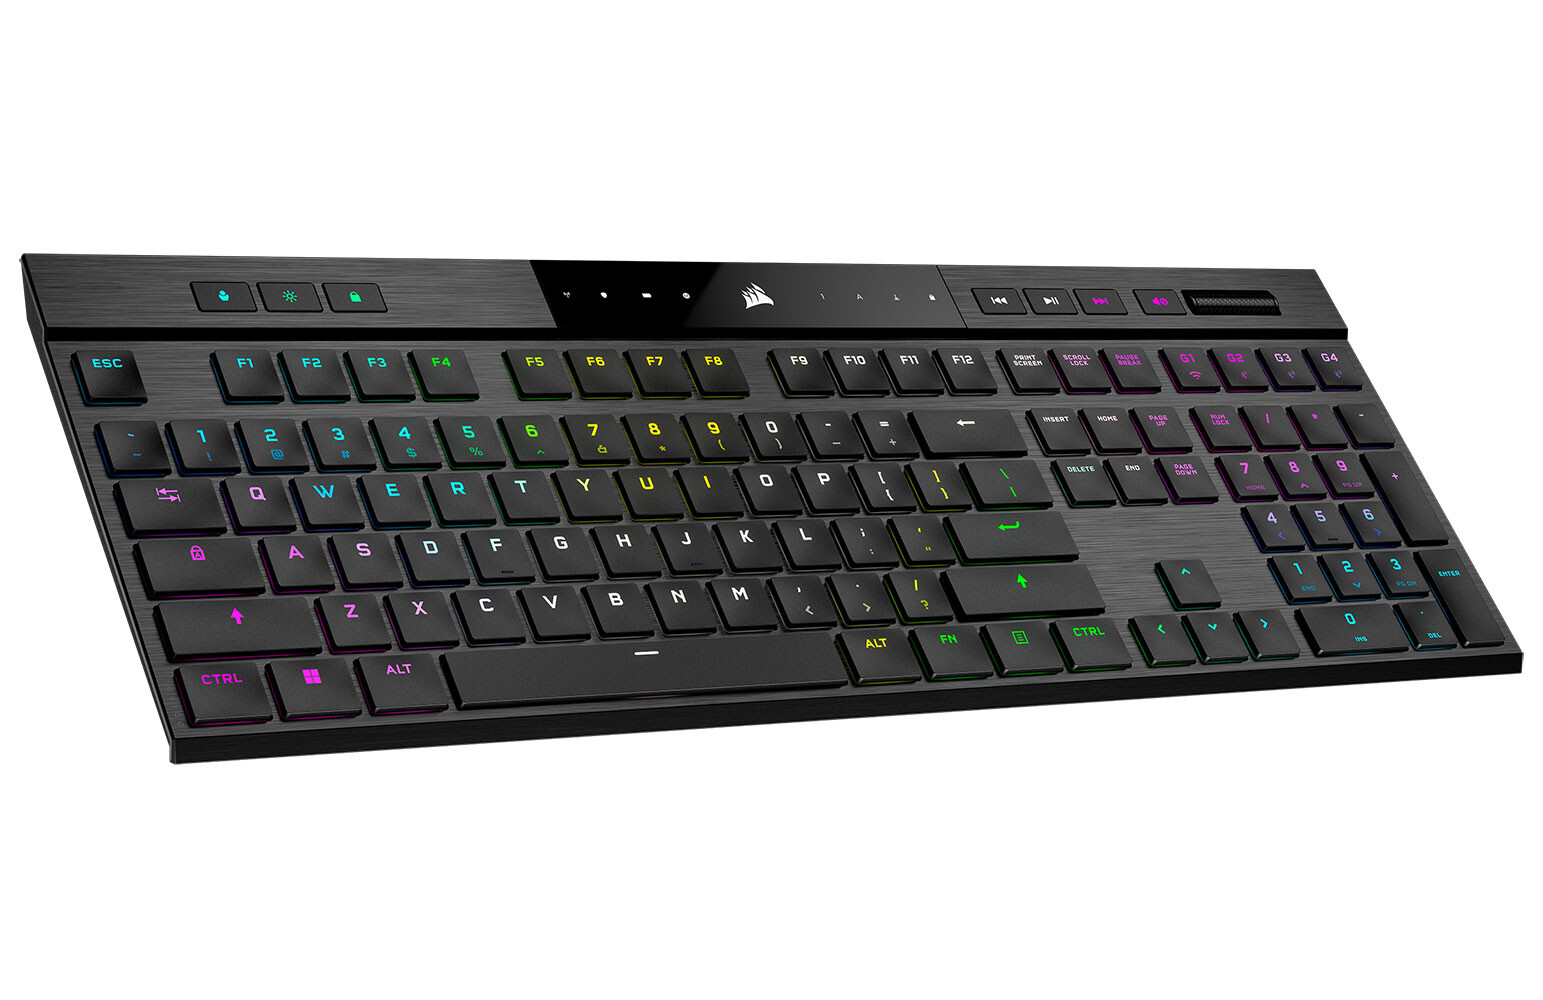 CORSAIR Announces the K100 Air Wireless Keyboard with CHERRY MX ULP Tactile Switches